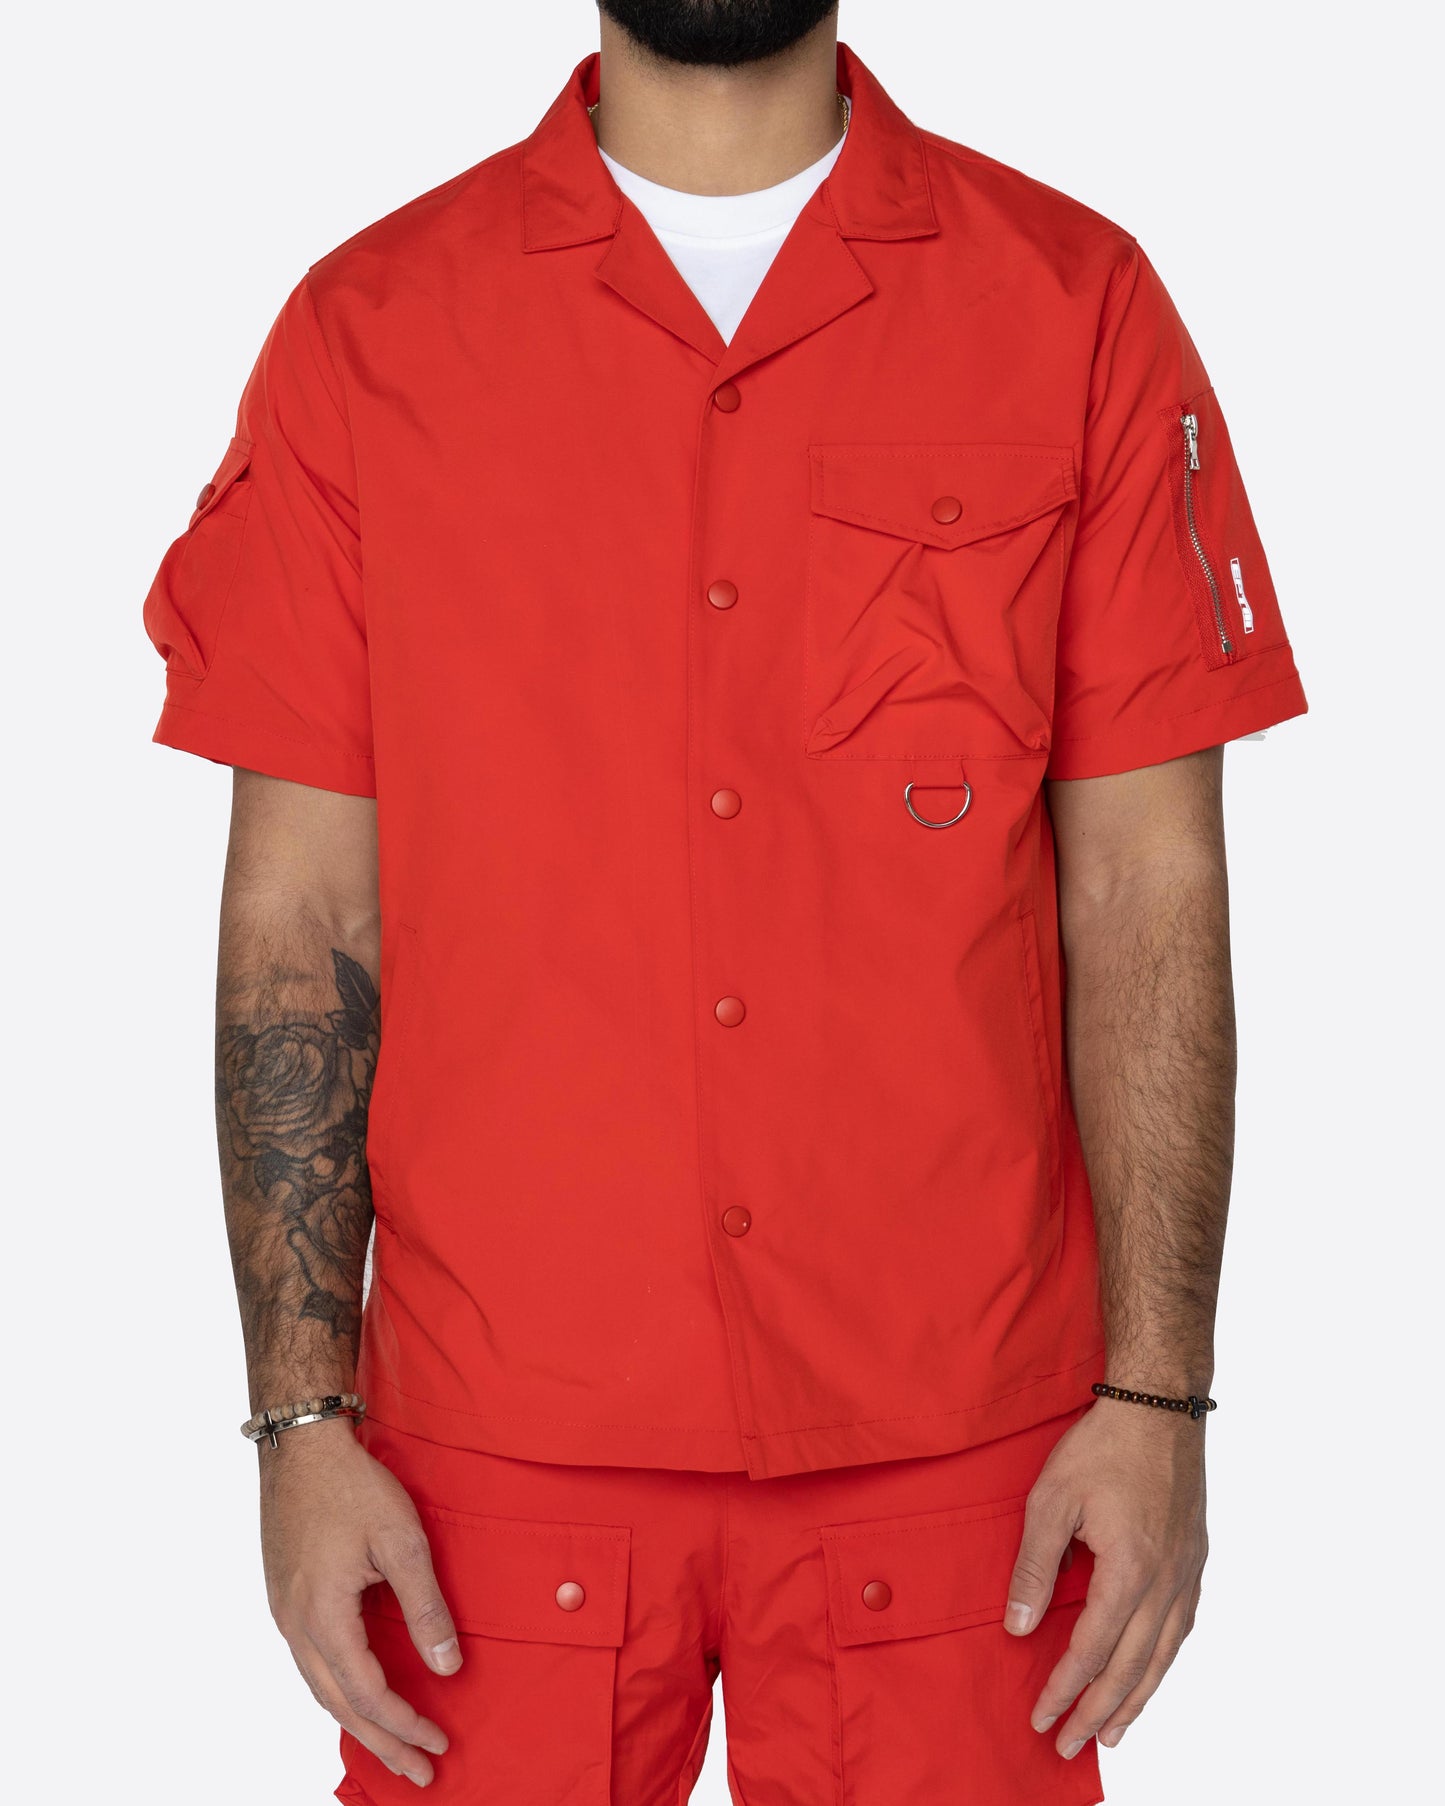 EPTM SNAP BUTTON SHIRT-RED